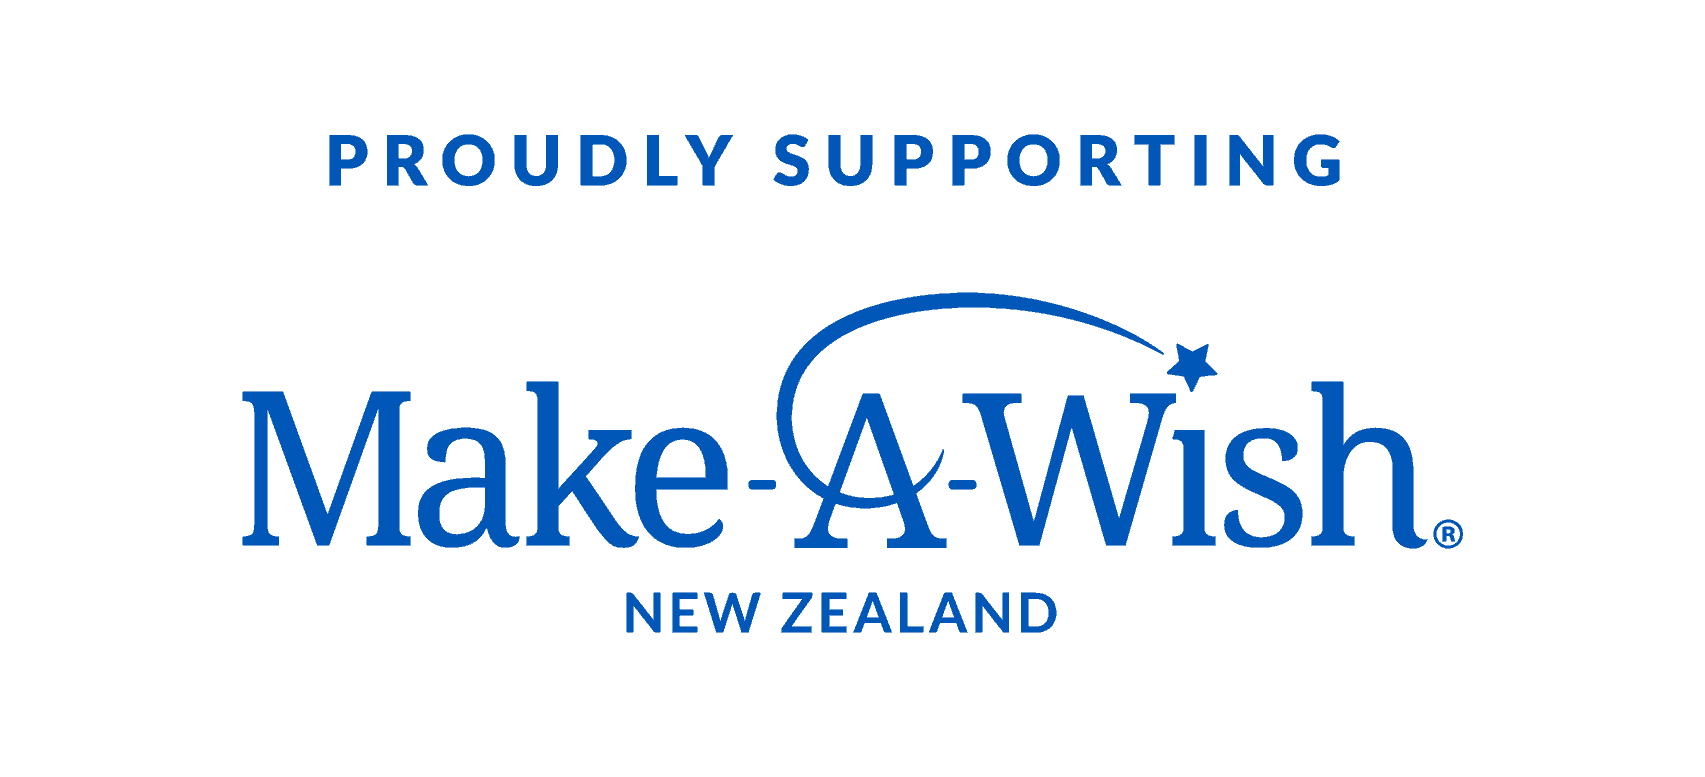 Proudly supporting Make-A-Wish